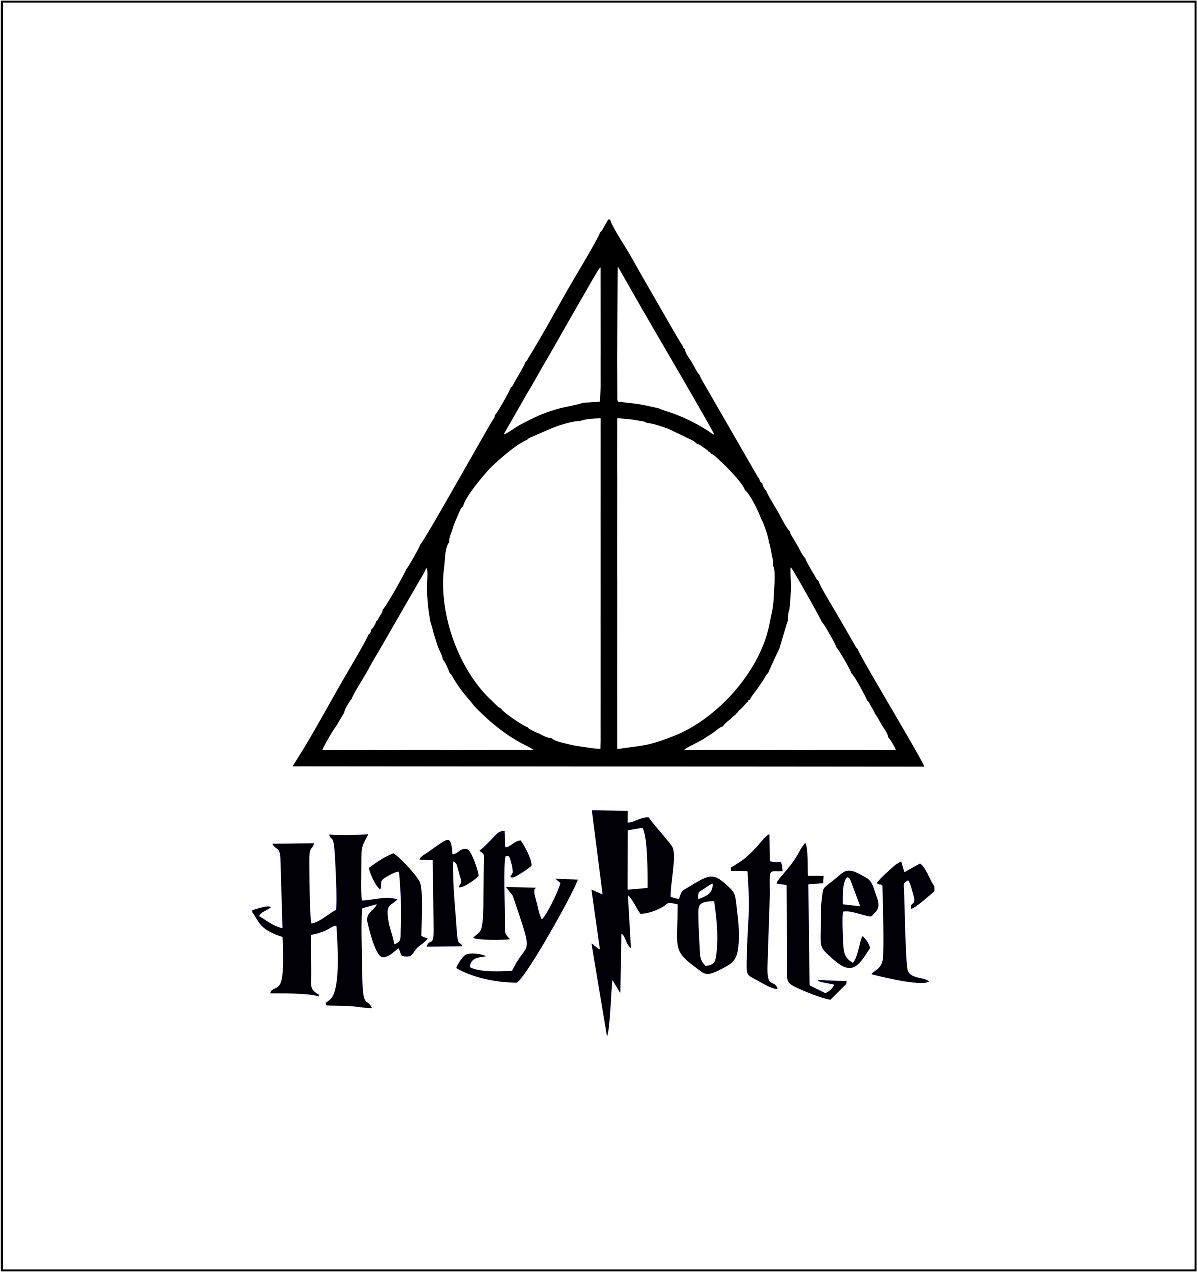 Download Harry Potter and the Deathly Hallows | SVGprinted